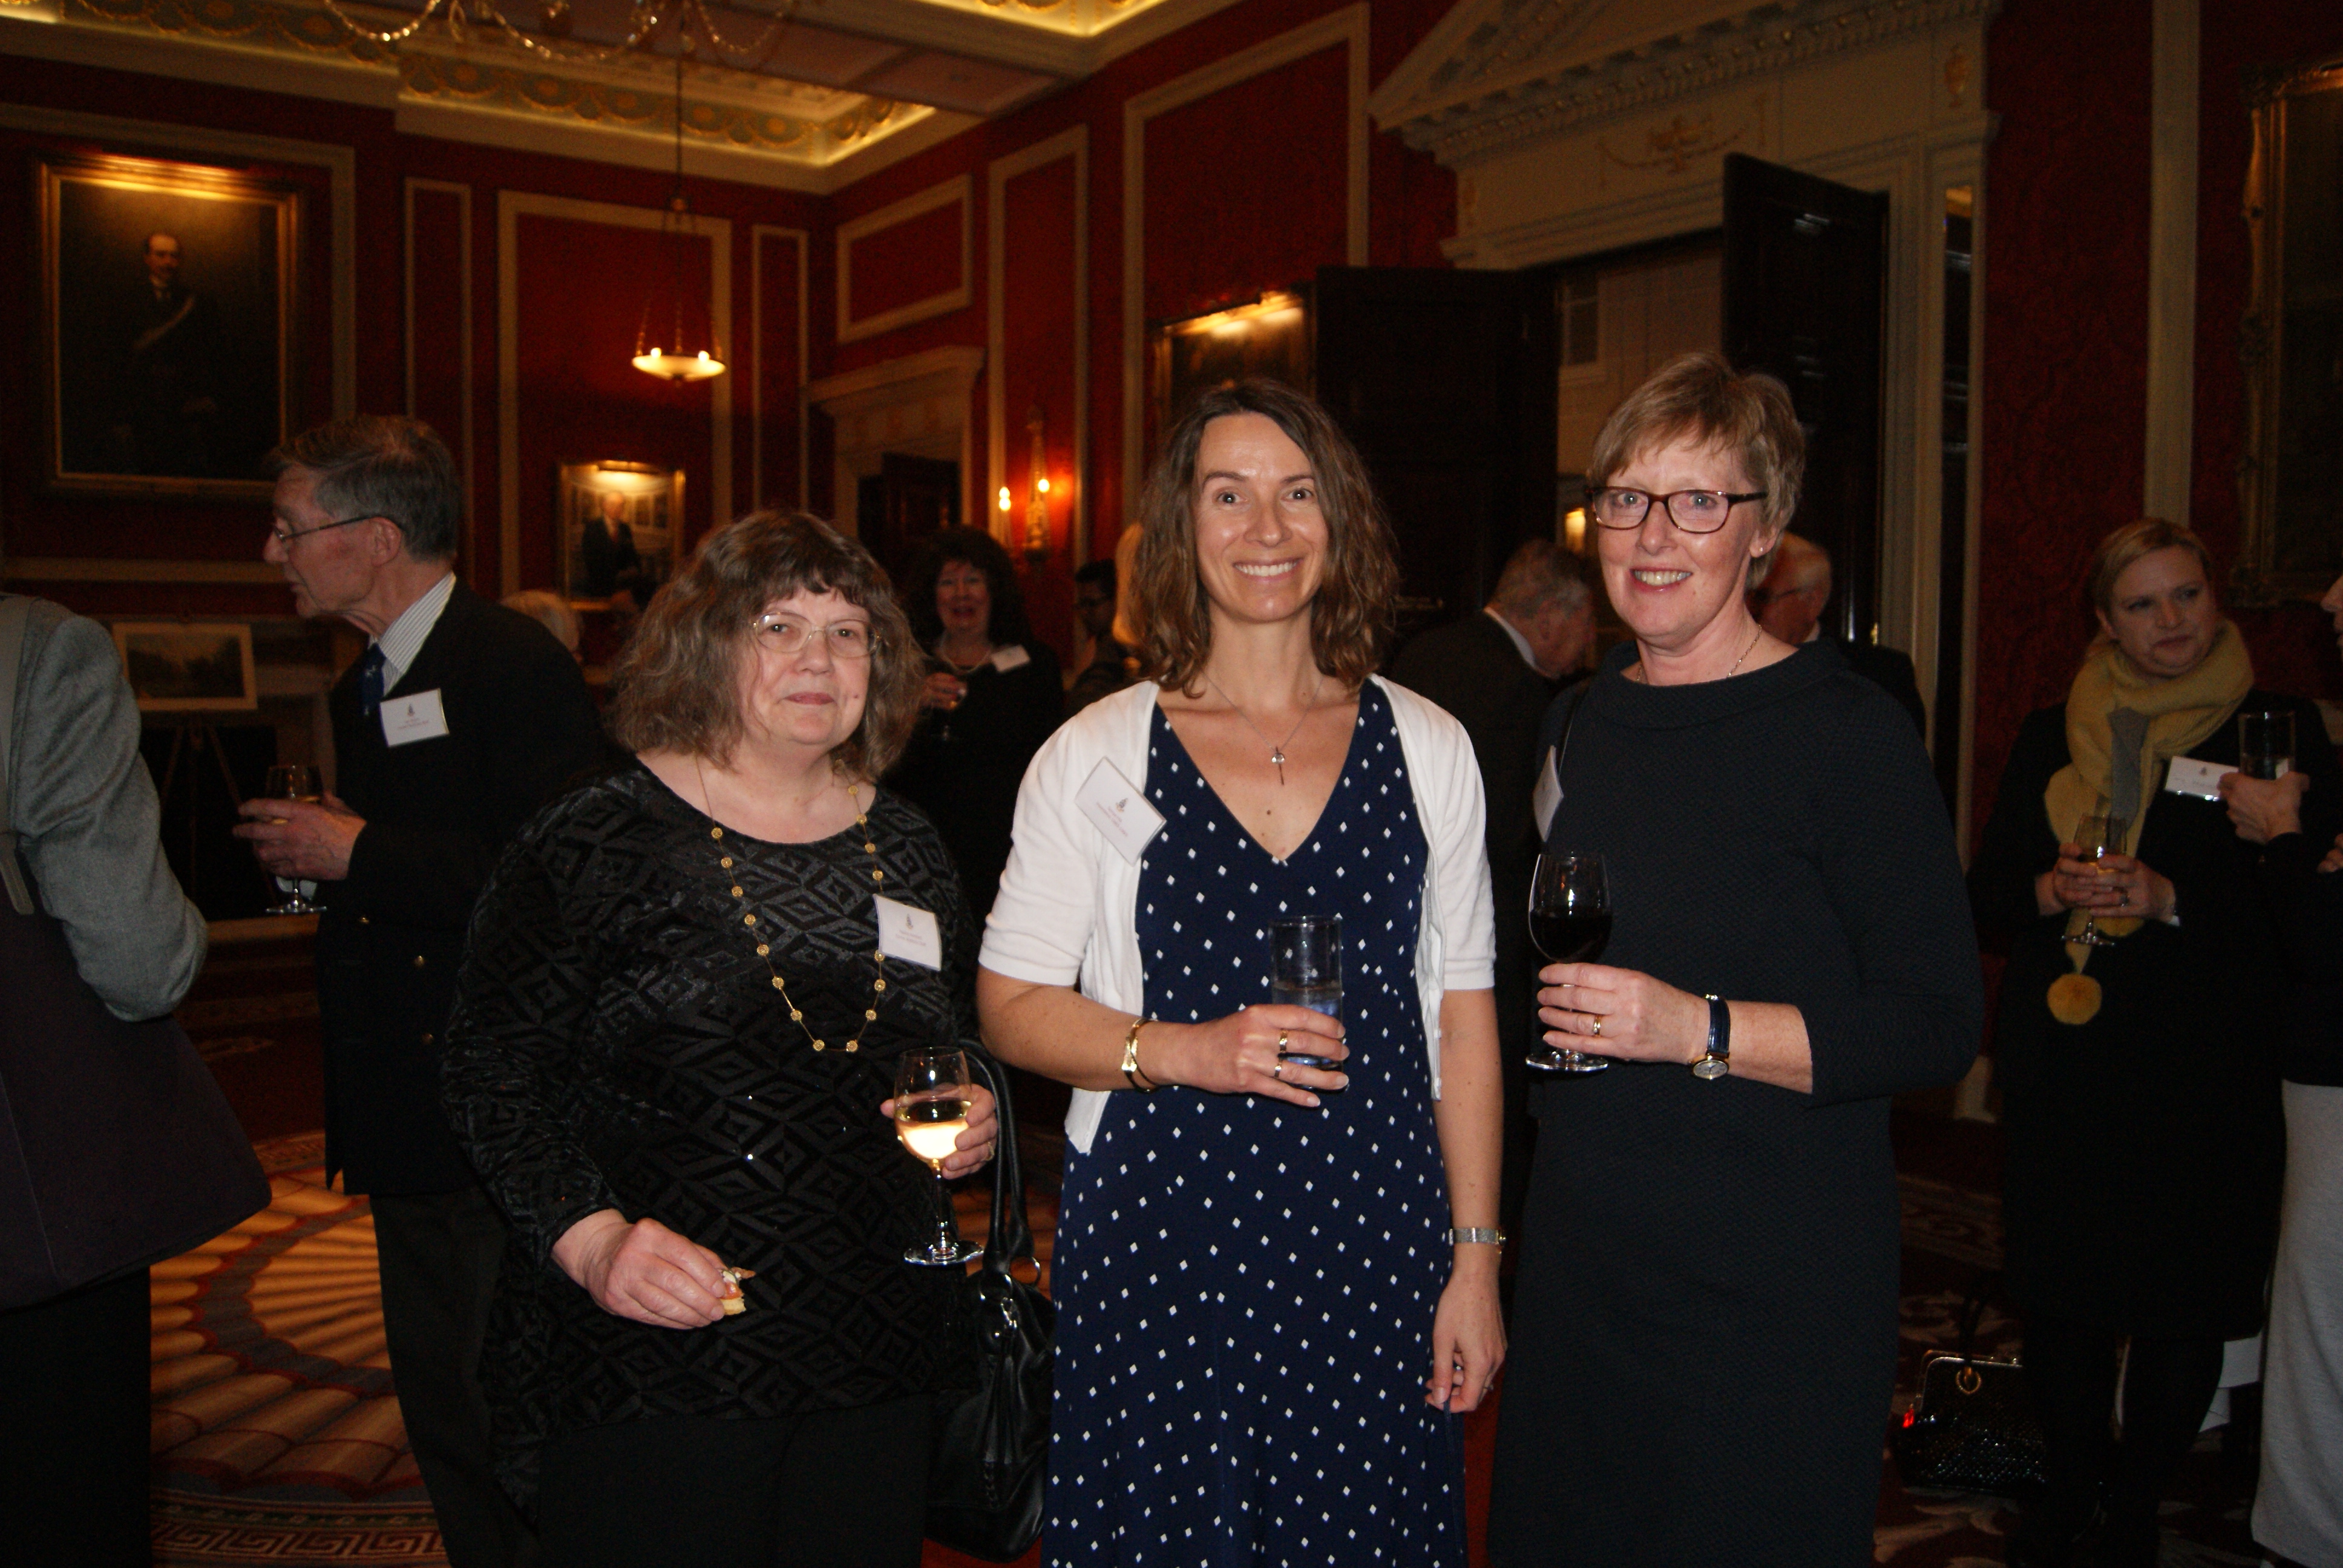 The Tenth Annual Foundation Lecture 2019 at the RAC Club (Guest Speaker: Dr Sonya Hill)